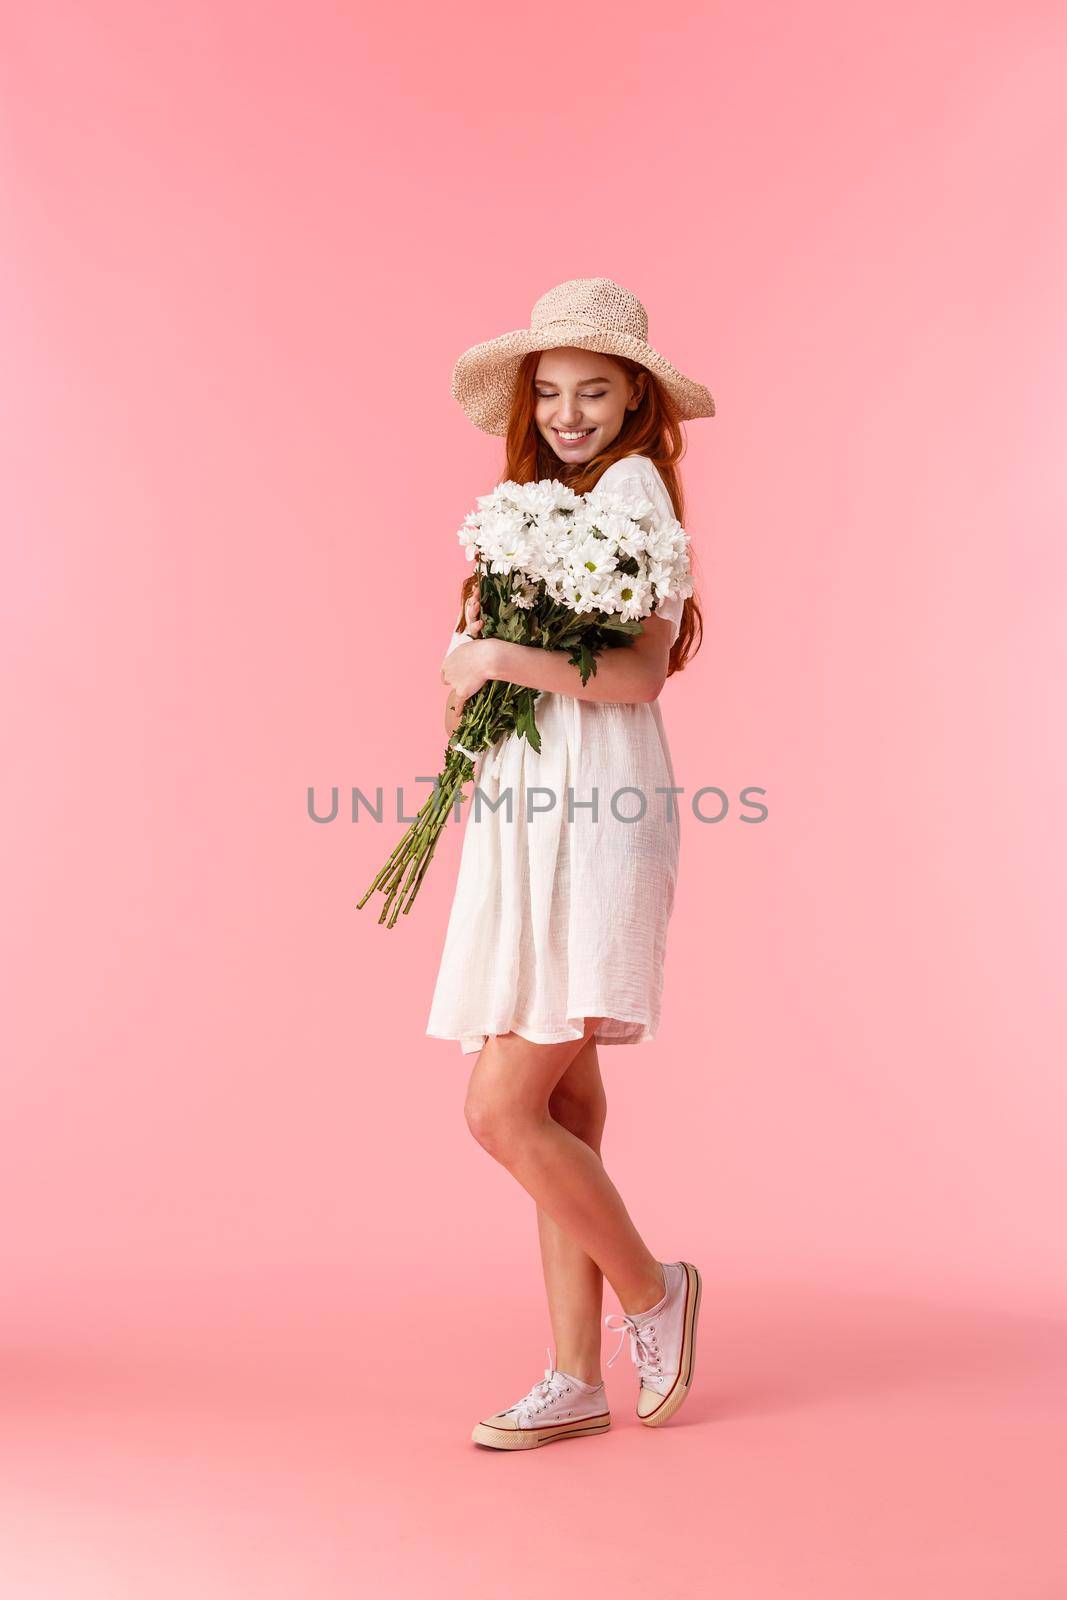 Full-length vertical shot lovely, sensual and romantic redhead woman in white dress, summer straw hat, receive beautiful bouquet on date, hugging flowers and grinning happy.